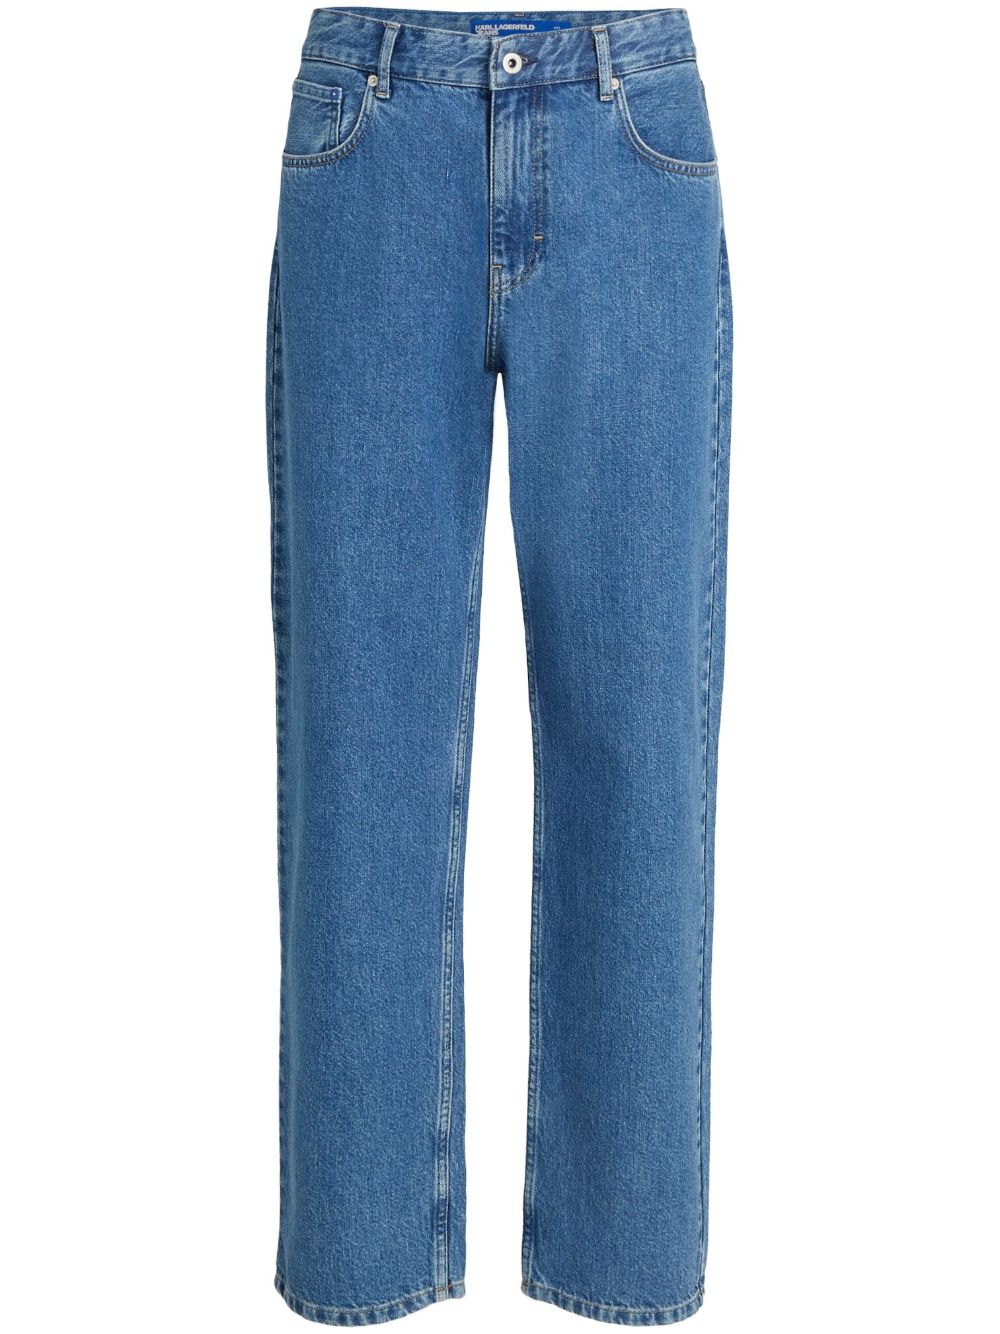 Karl Lagerfeld Jeans Archive relaxed-fit jeans - Blue von Karl Lagerfeld Jeans